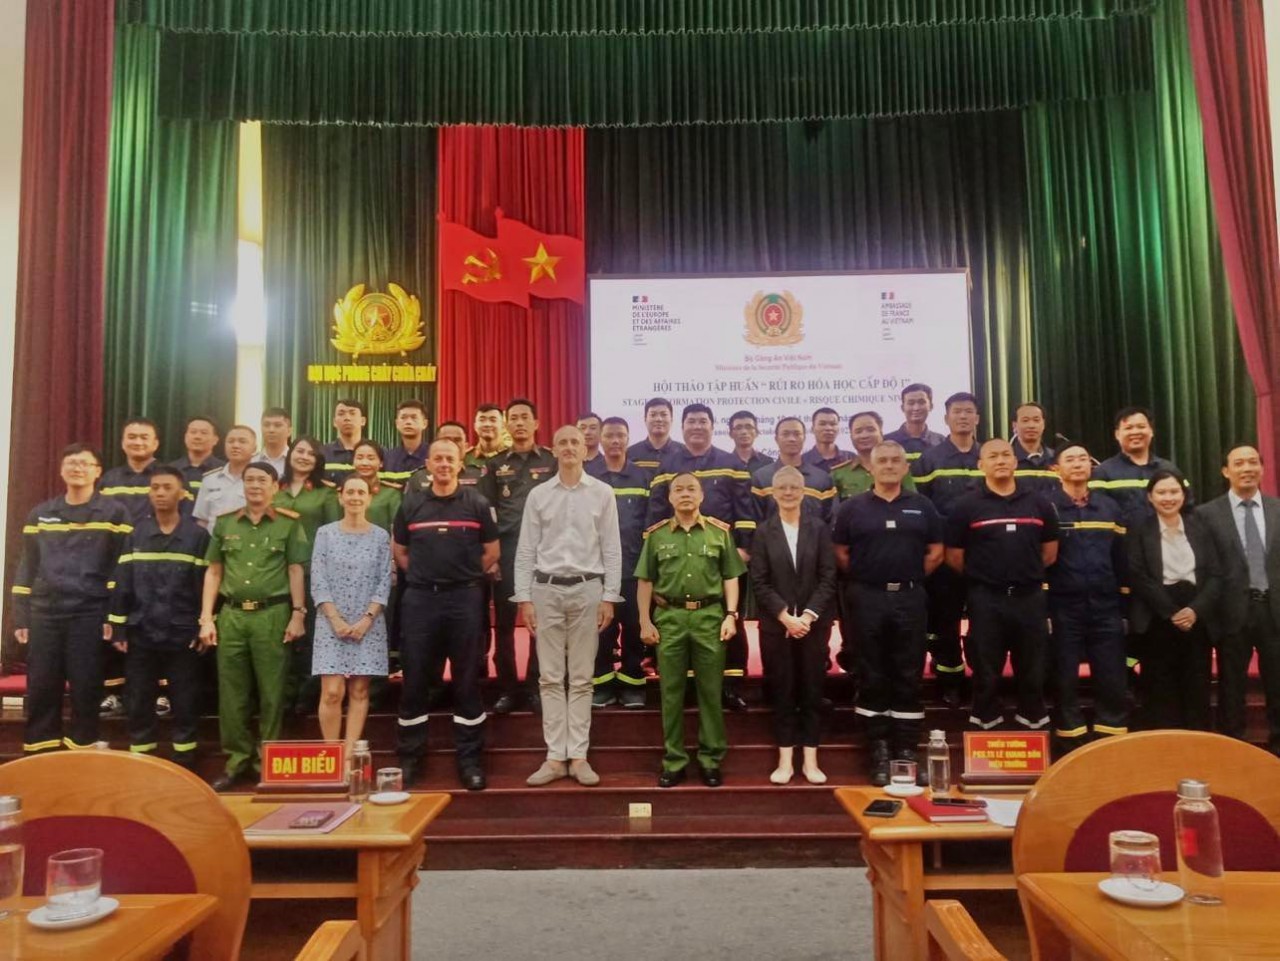 The training aims to help Vietnamese and Cambodian firefighters better cope with accidents in industrial zones or in the process of transporting chemicals.